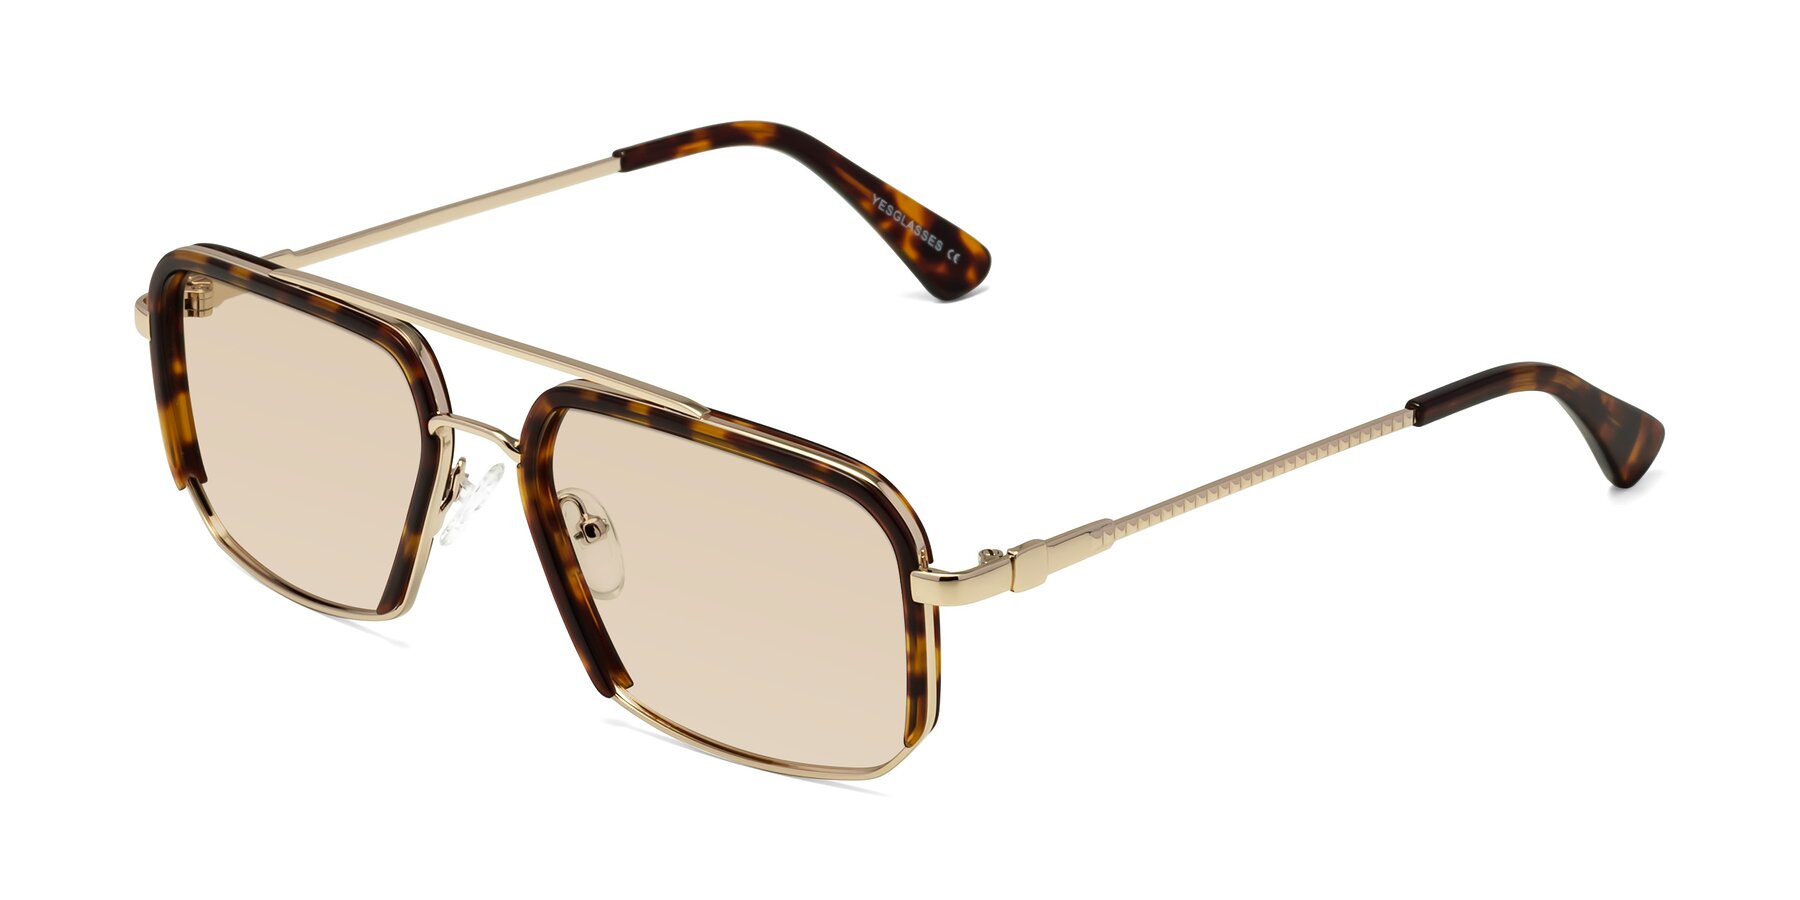 Angle of Dechter in Tortoise-Gold with Light Brown Tinted Lenses